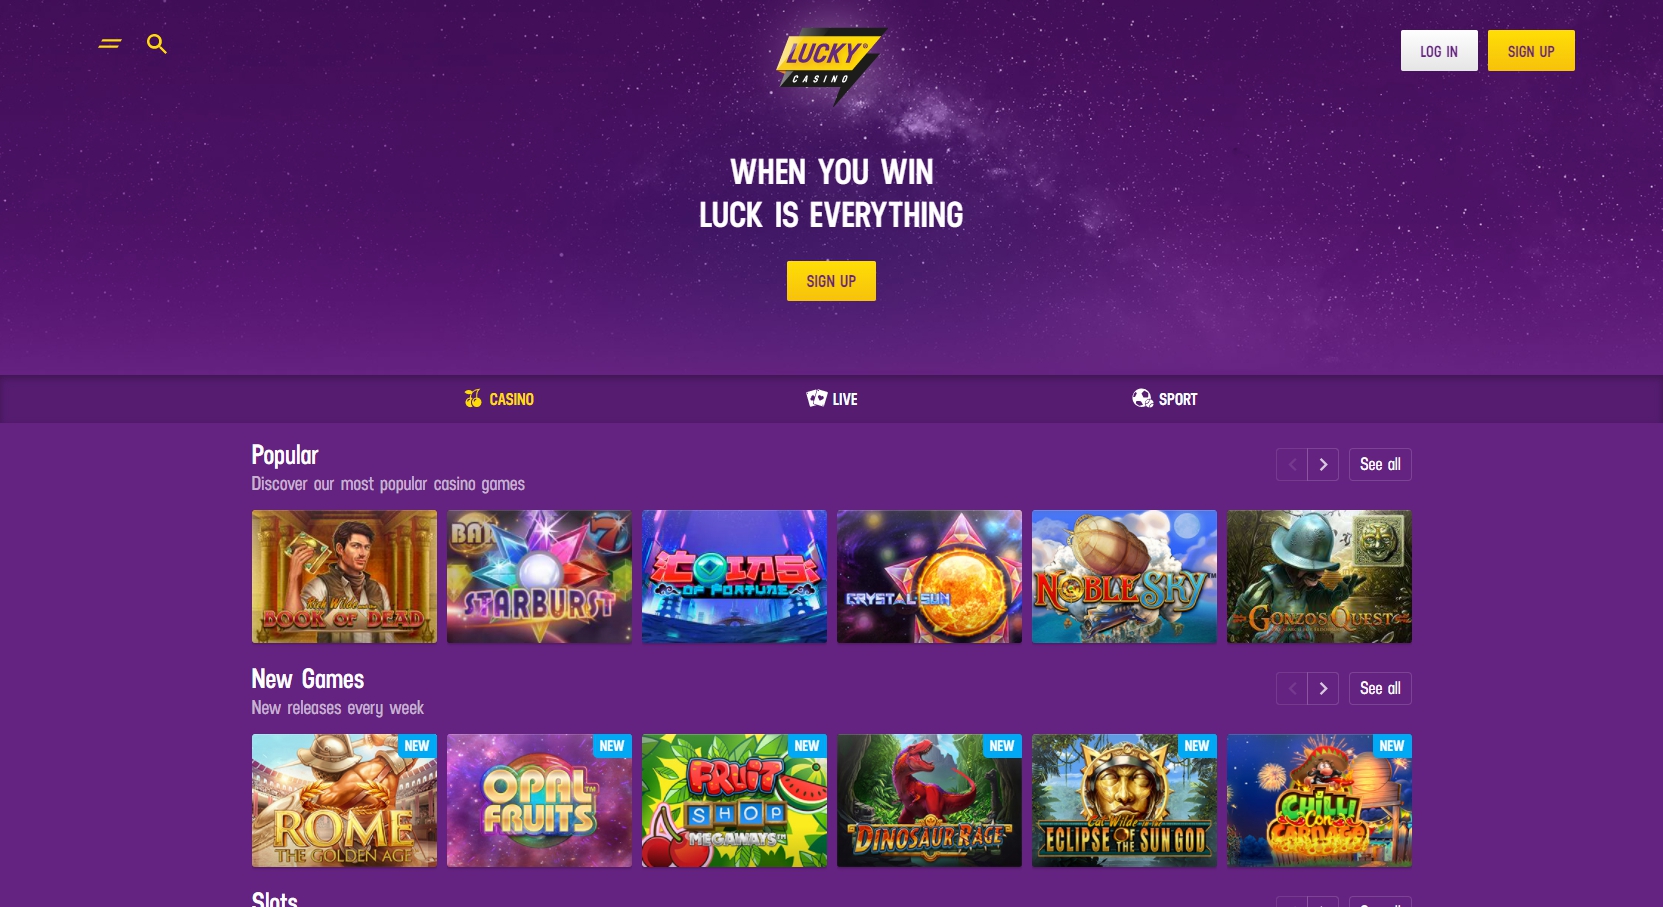 Lucky Casino Review